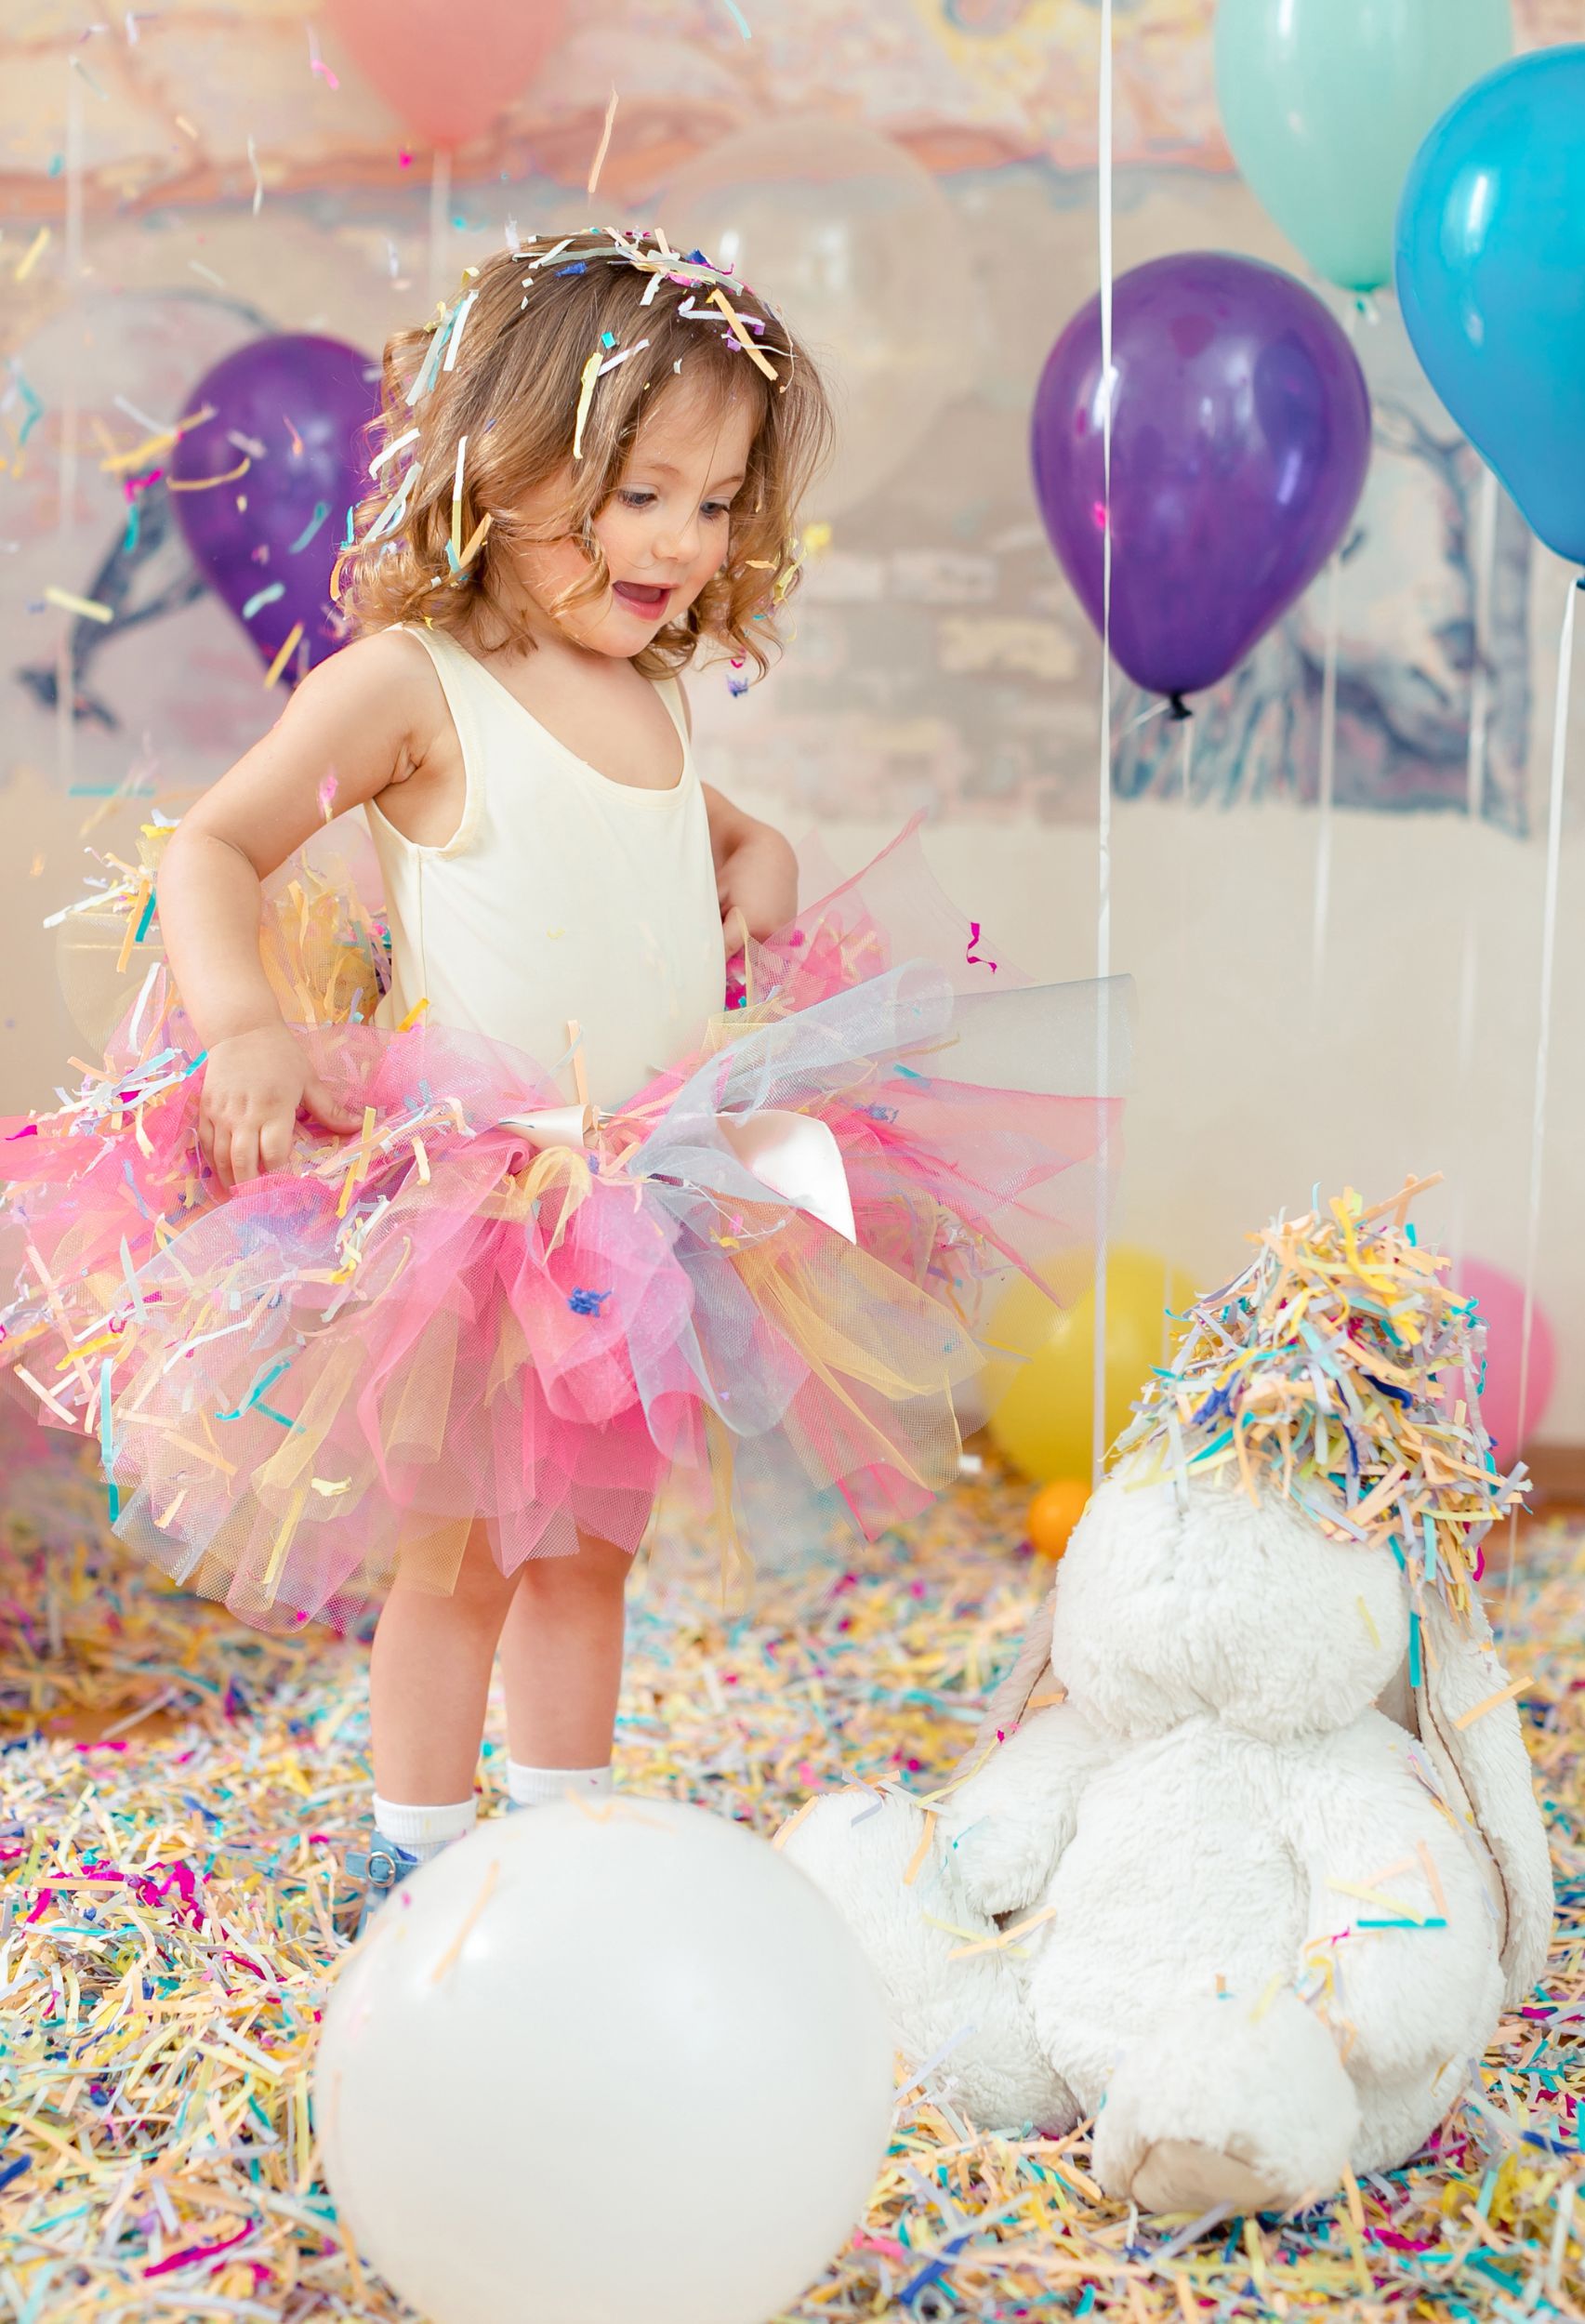 How To Throw a Fantastic Birthday Party for Your Kid